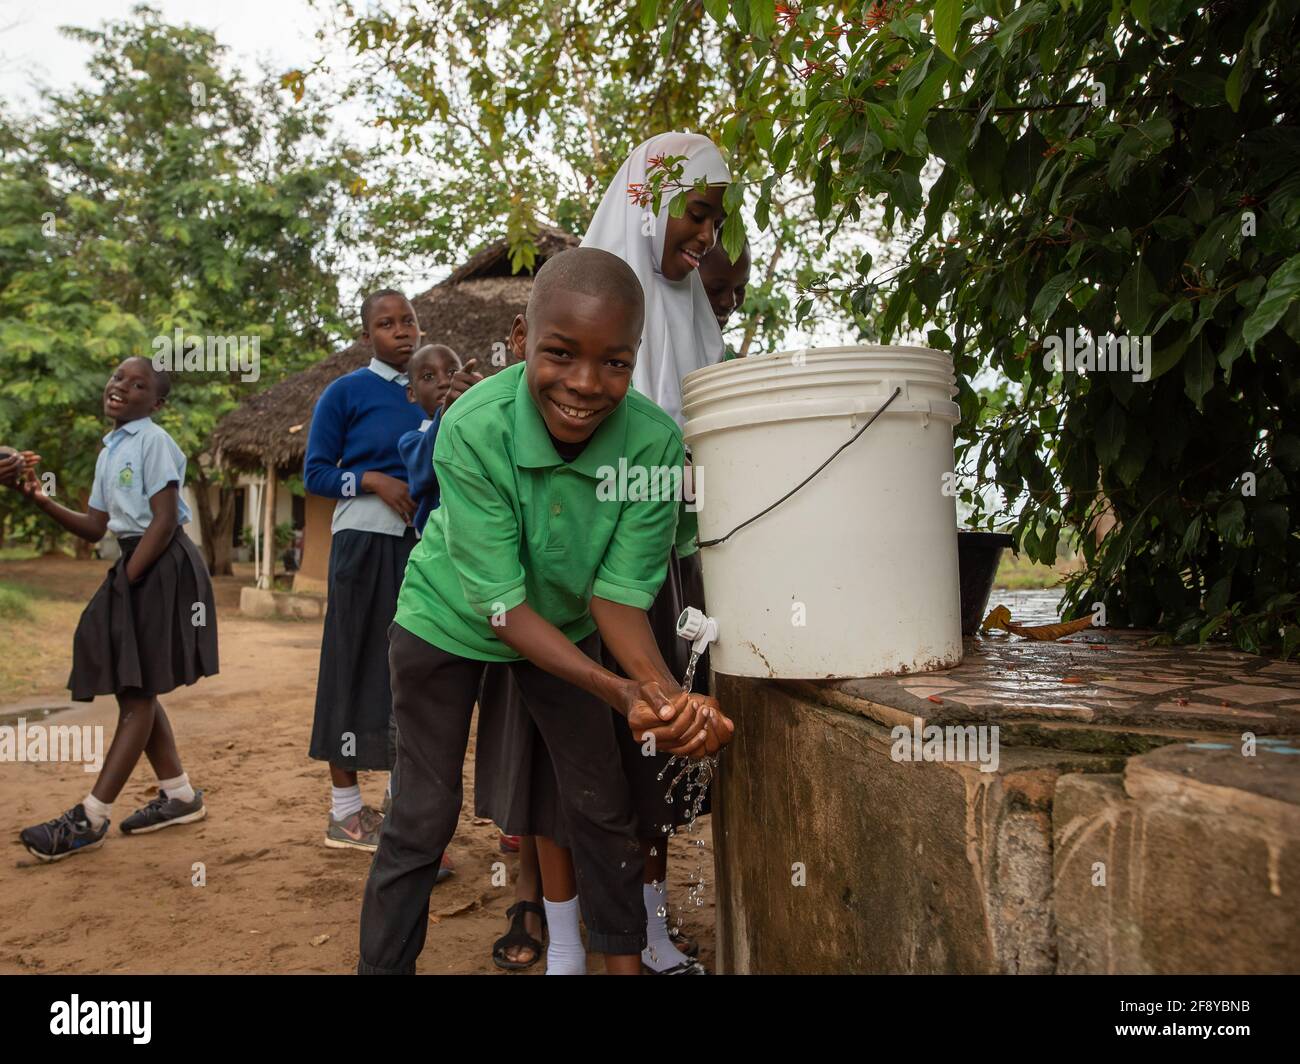 Dodoma, Tanzania. 08-18-2019. A male black muslim boy finishes lunch in their school and is making a line to wash his hands after lunch in a remote vi Stock Photo